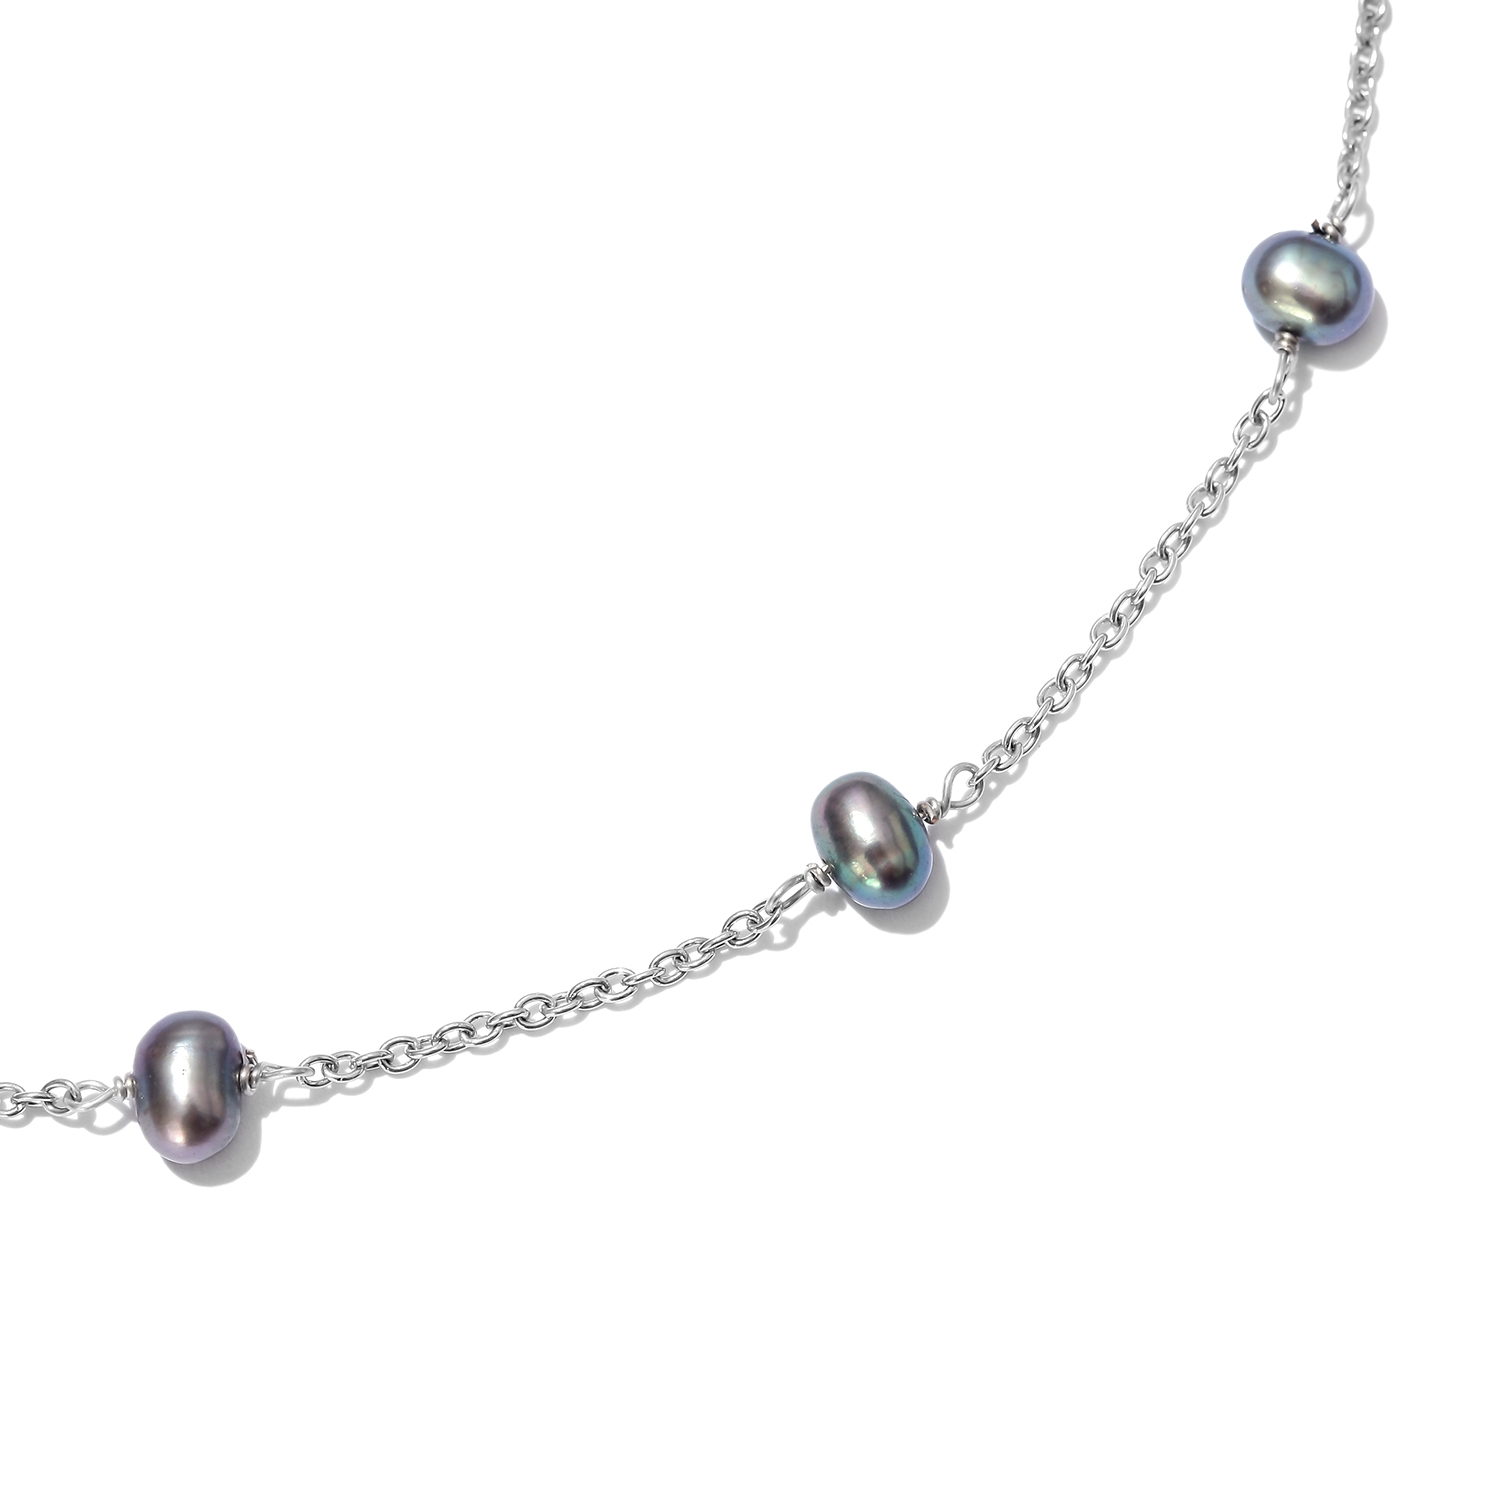 Peach Freshwater Pearl Station Necklace (20 in) - Houzz of DVA Boutique